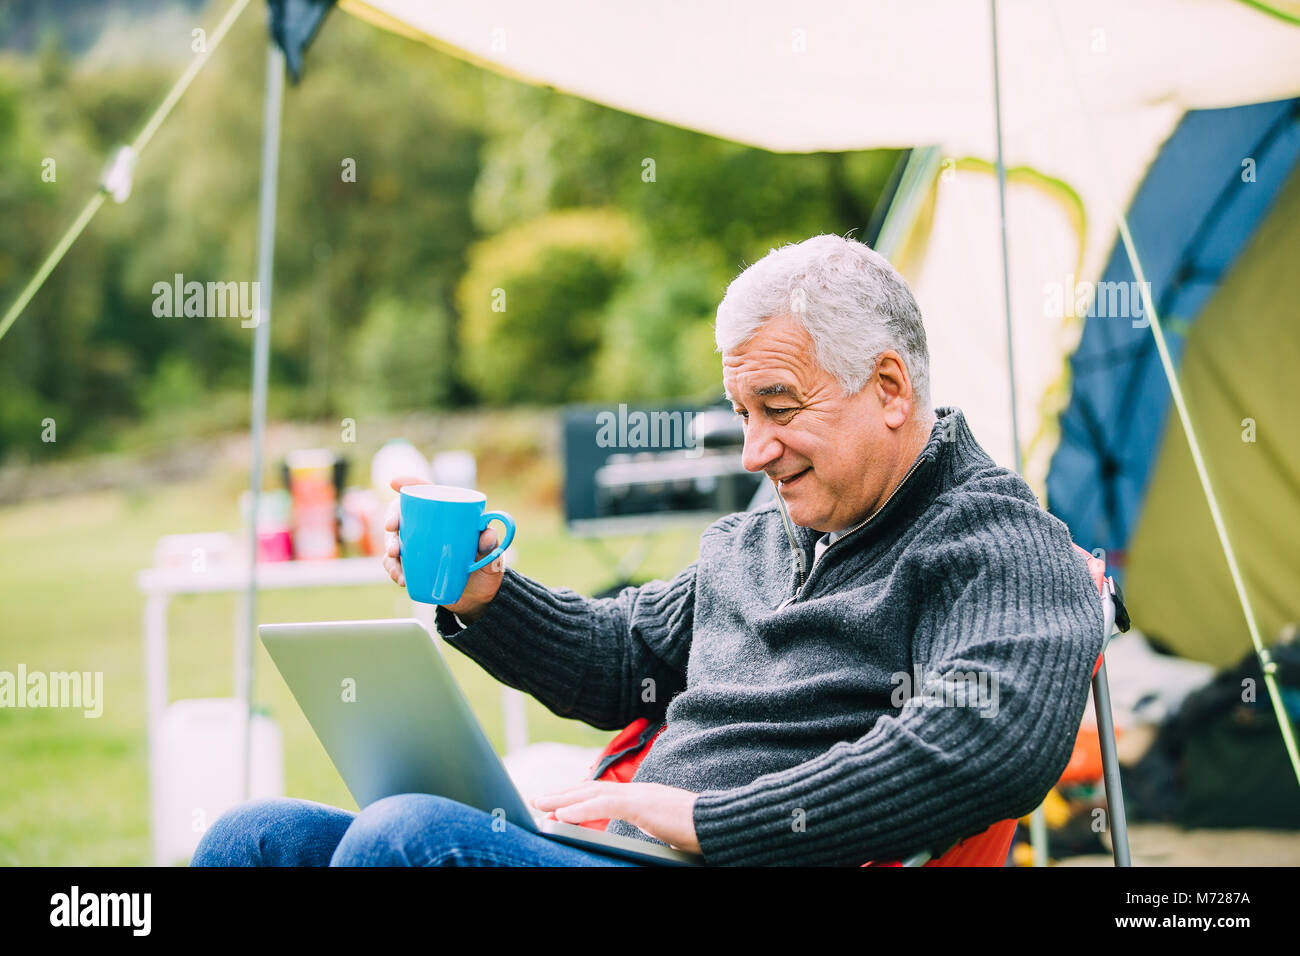 Senior man is relaxing in a chair by his tent in the campsite. He is enjoying a cup of tea while using a laptop. Stock Photo